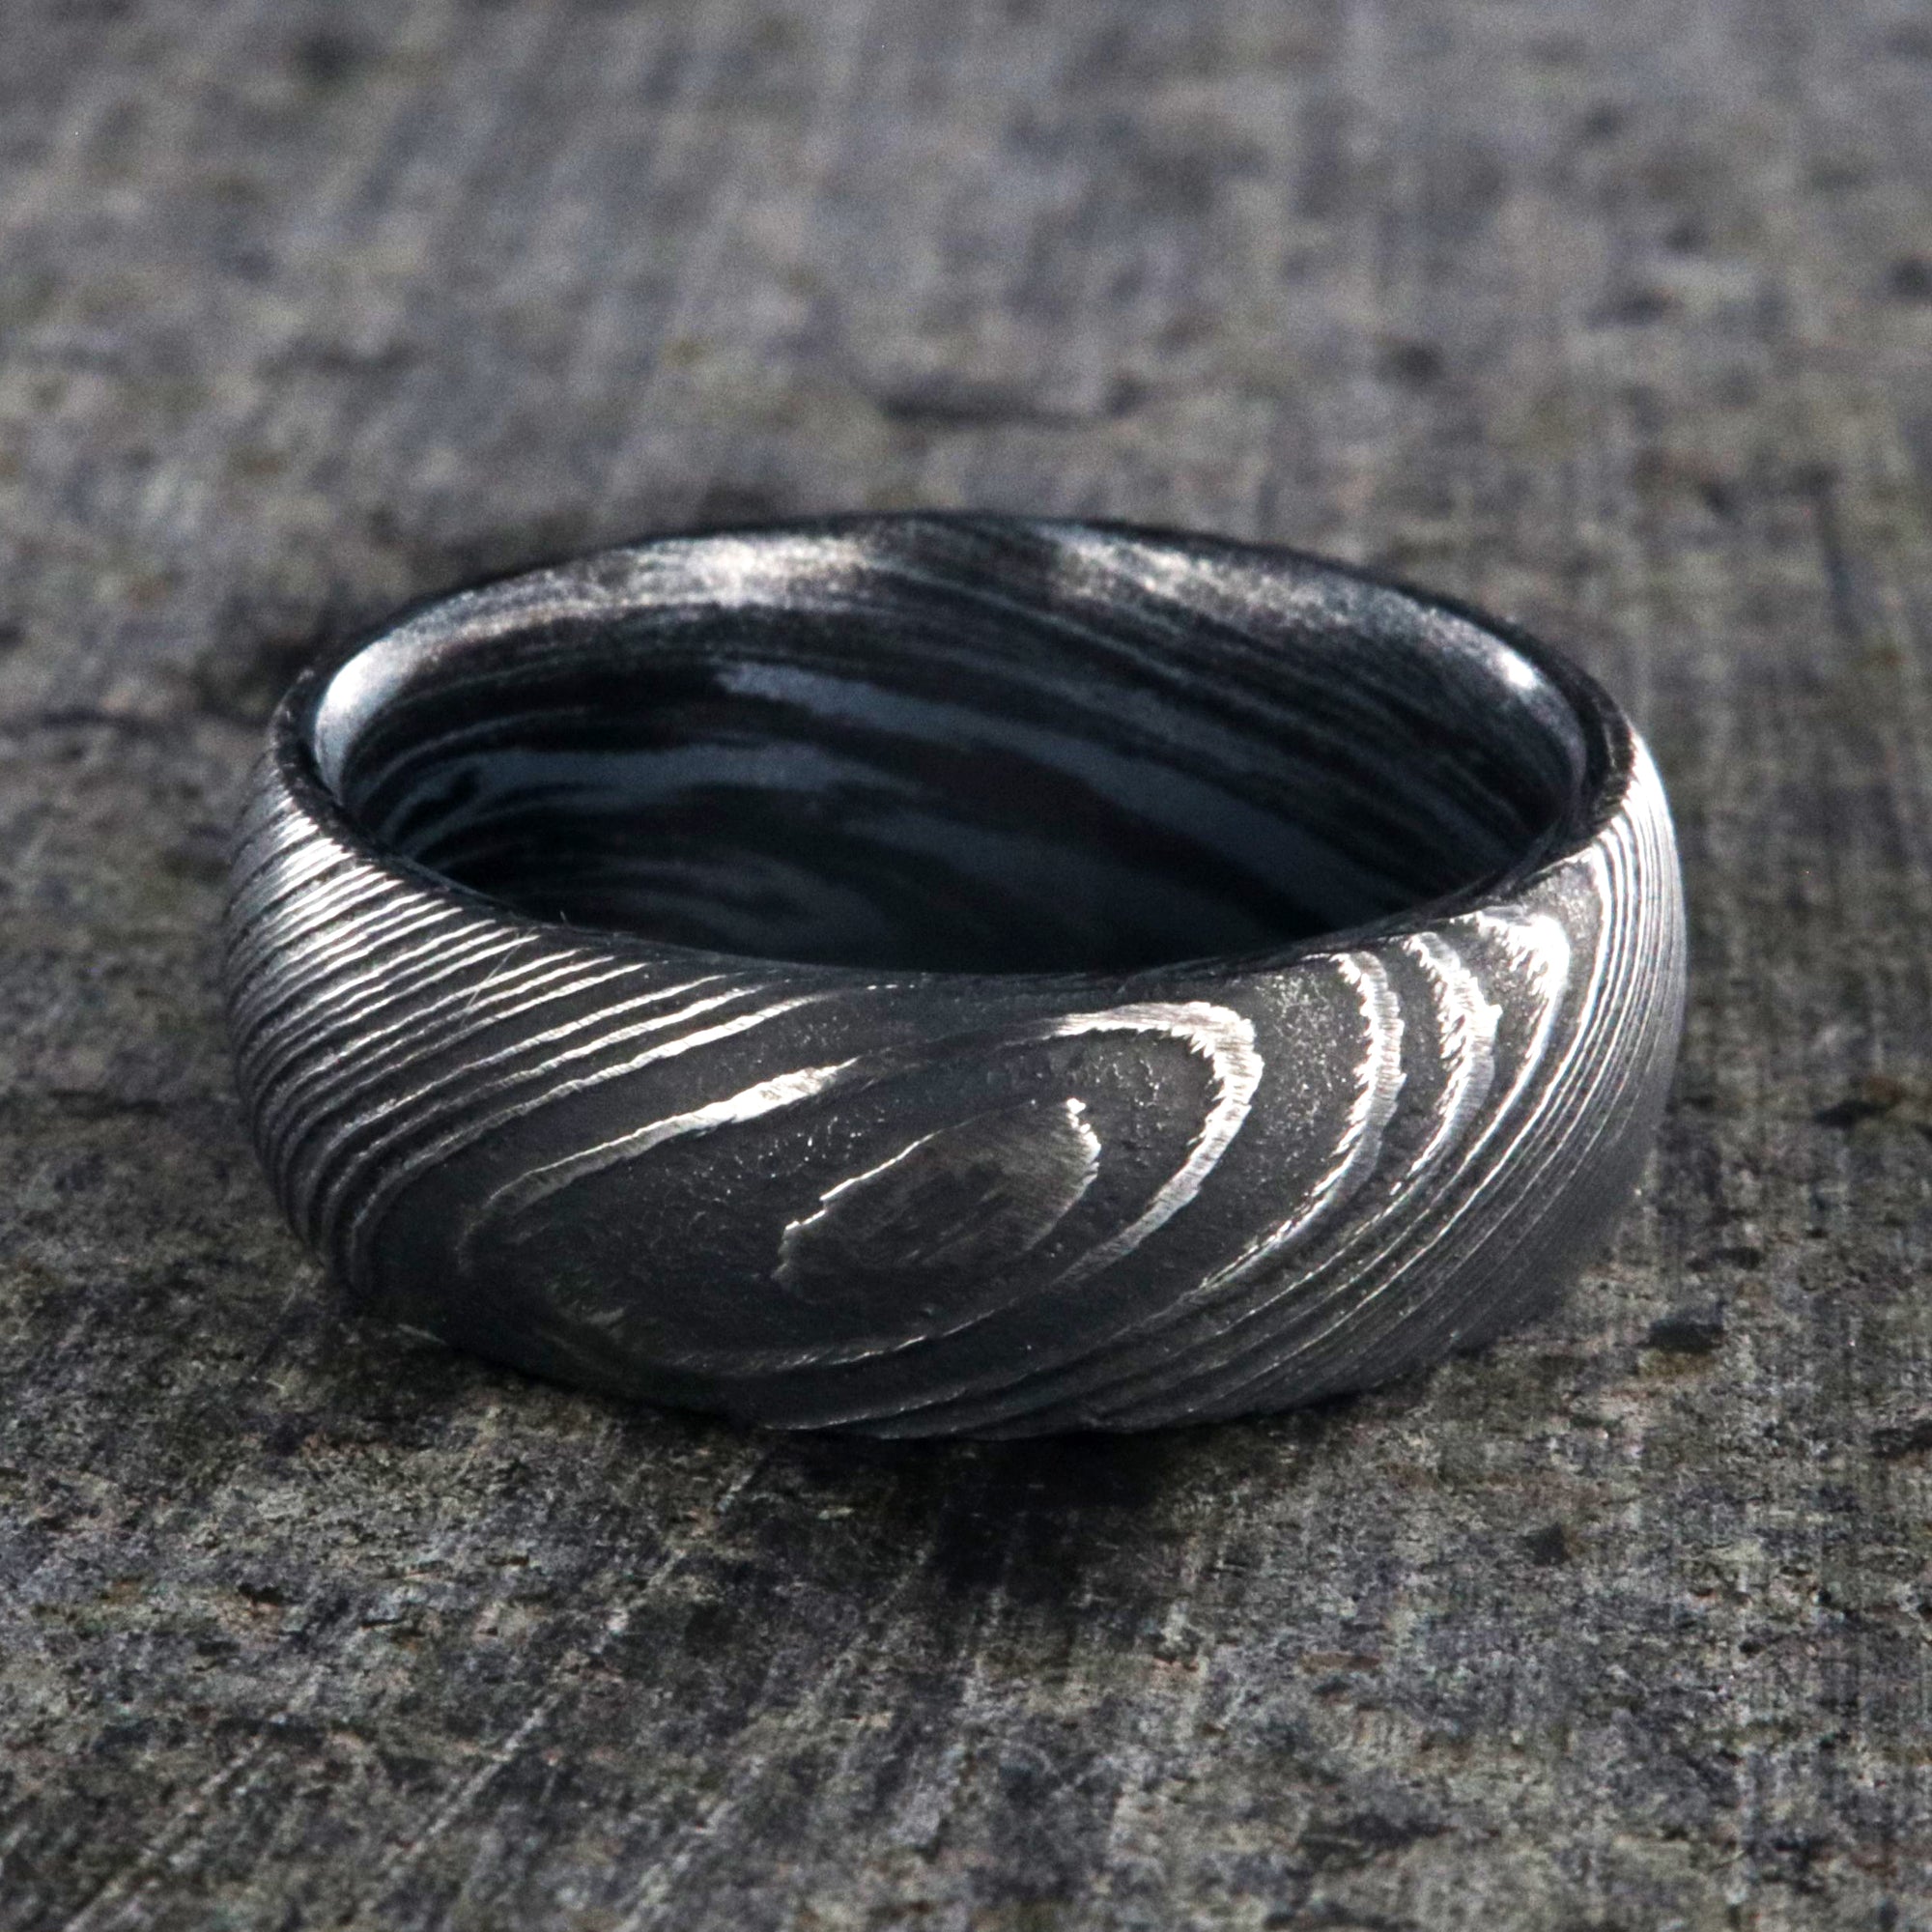 8mm wide Damascus steel wedding ring for men with a blue and black swirled cobaltium mokume sleeve